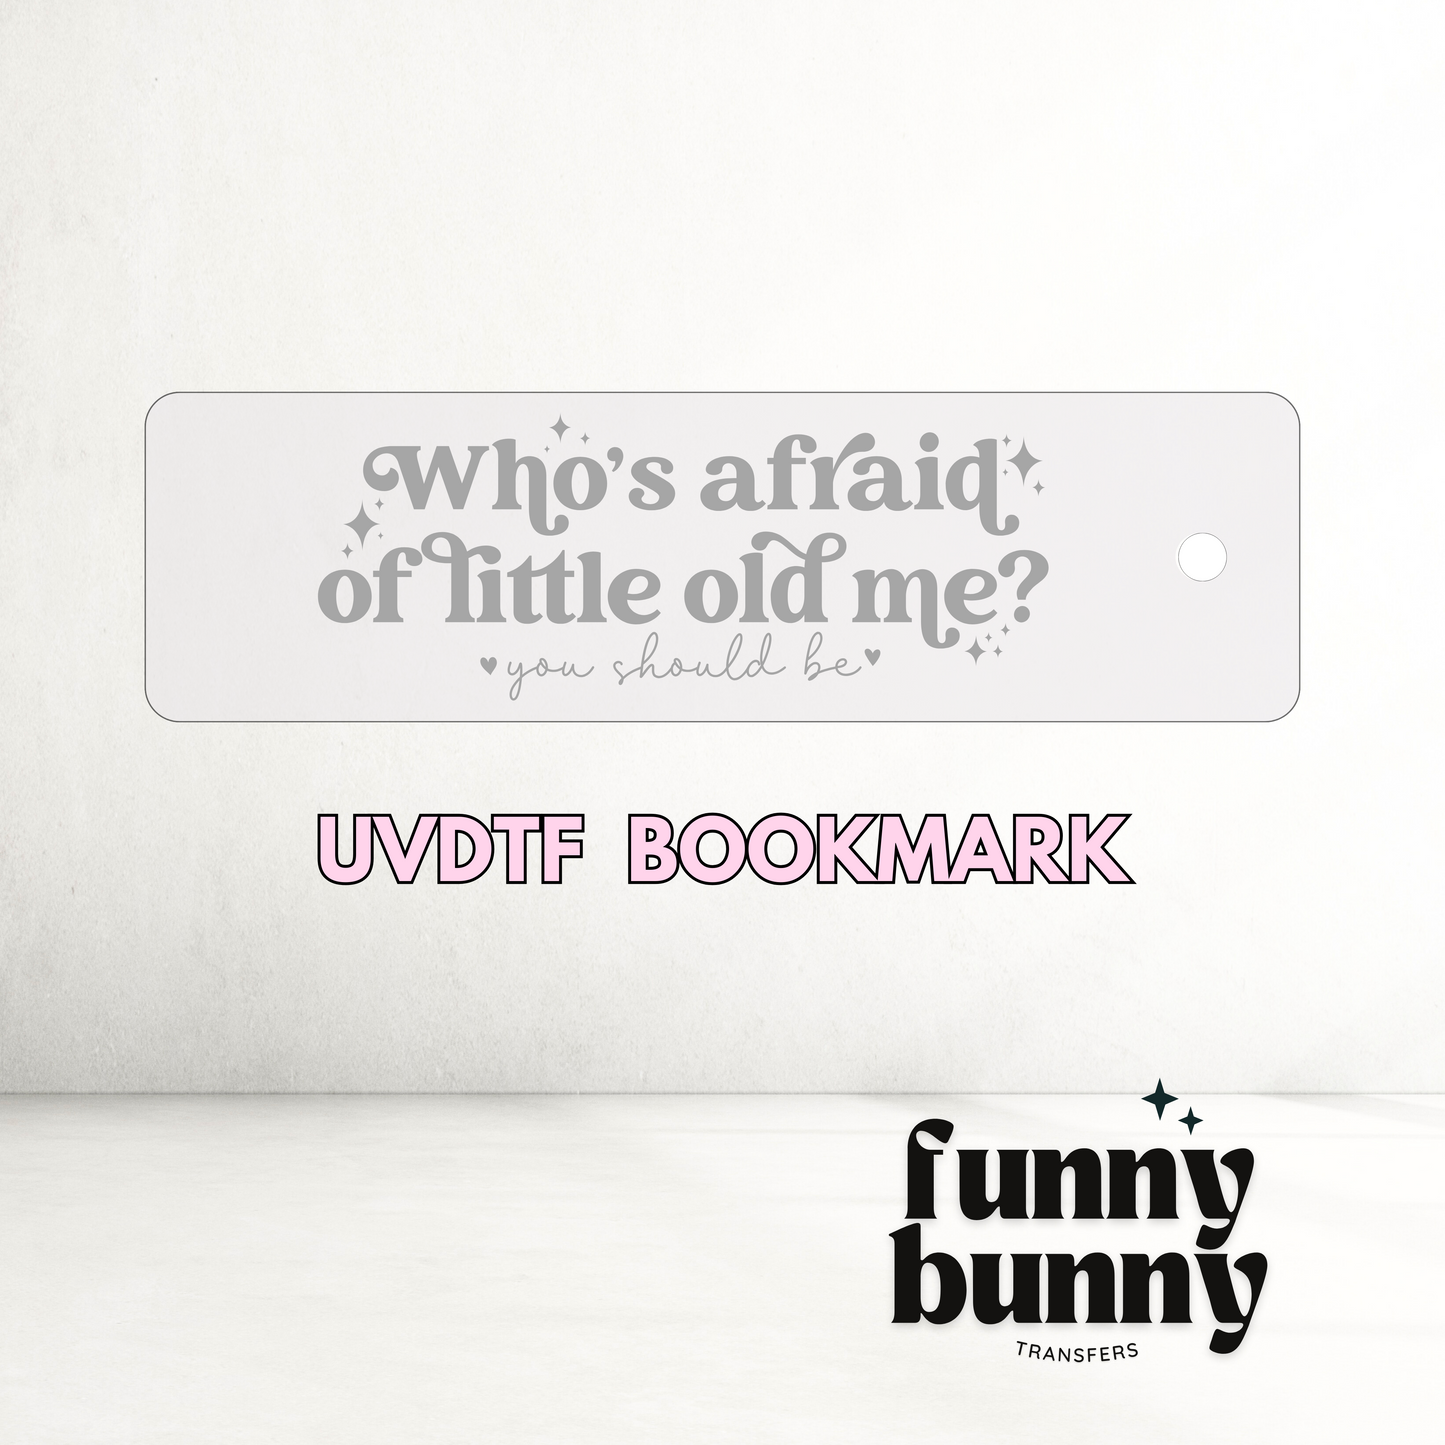 You Should Be  - UVDTF Bookmark Decal